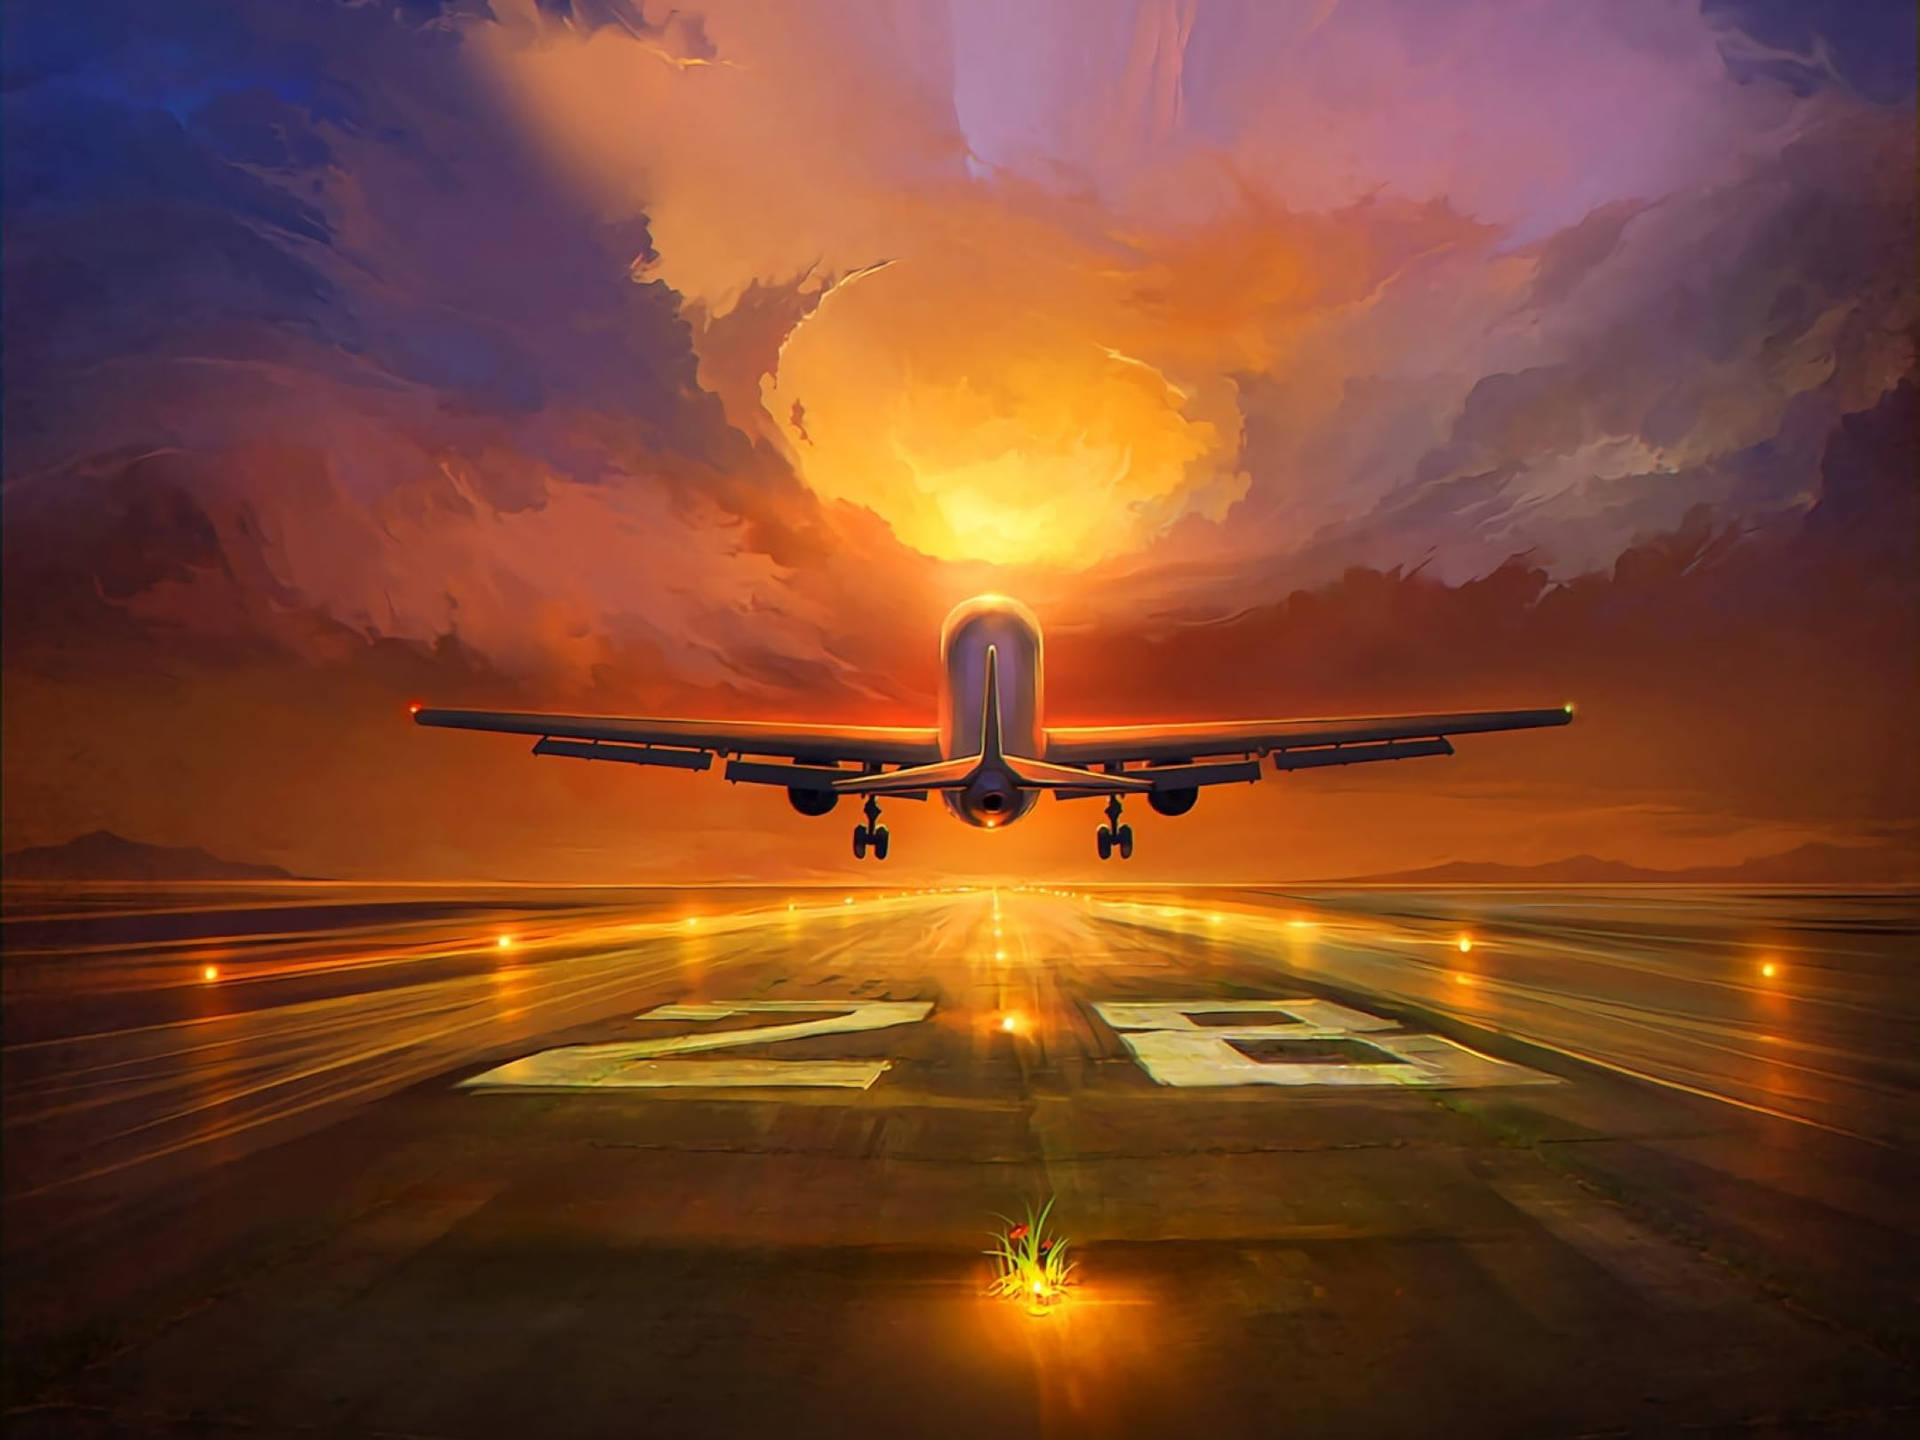 Captivating Artwork On Runway With An Airplane In View Background